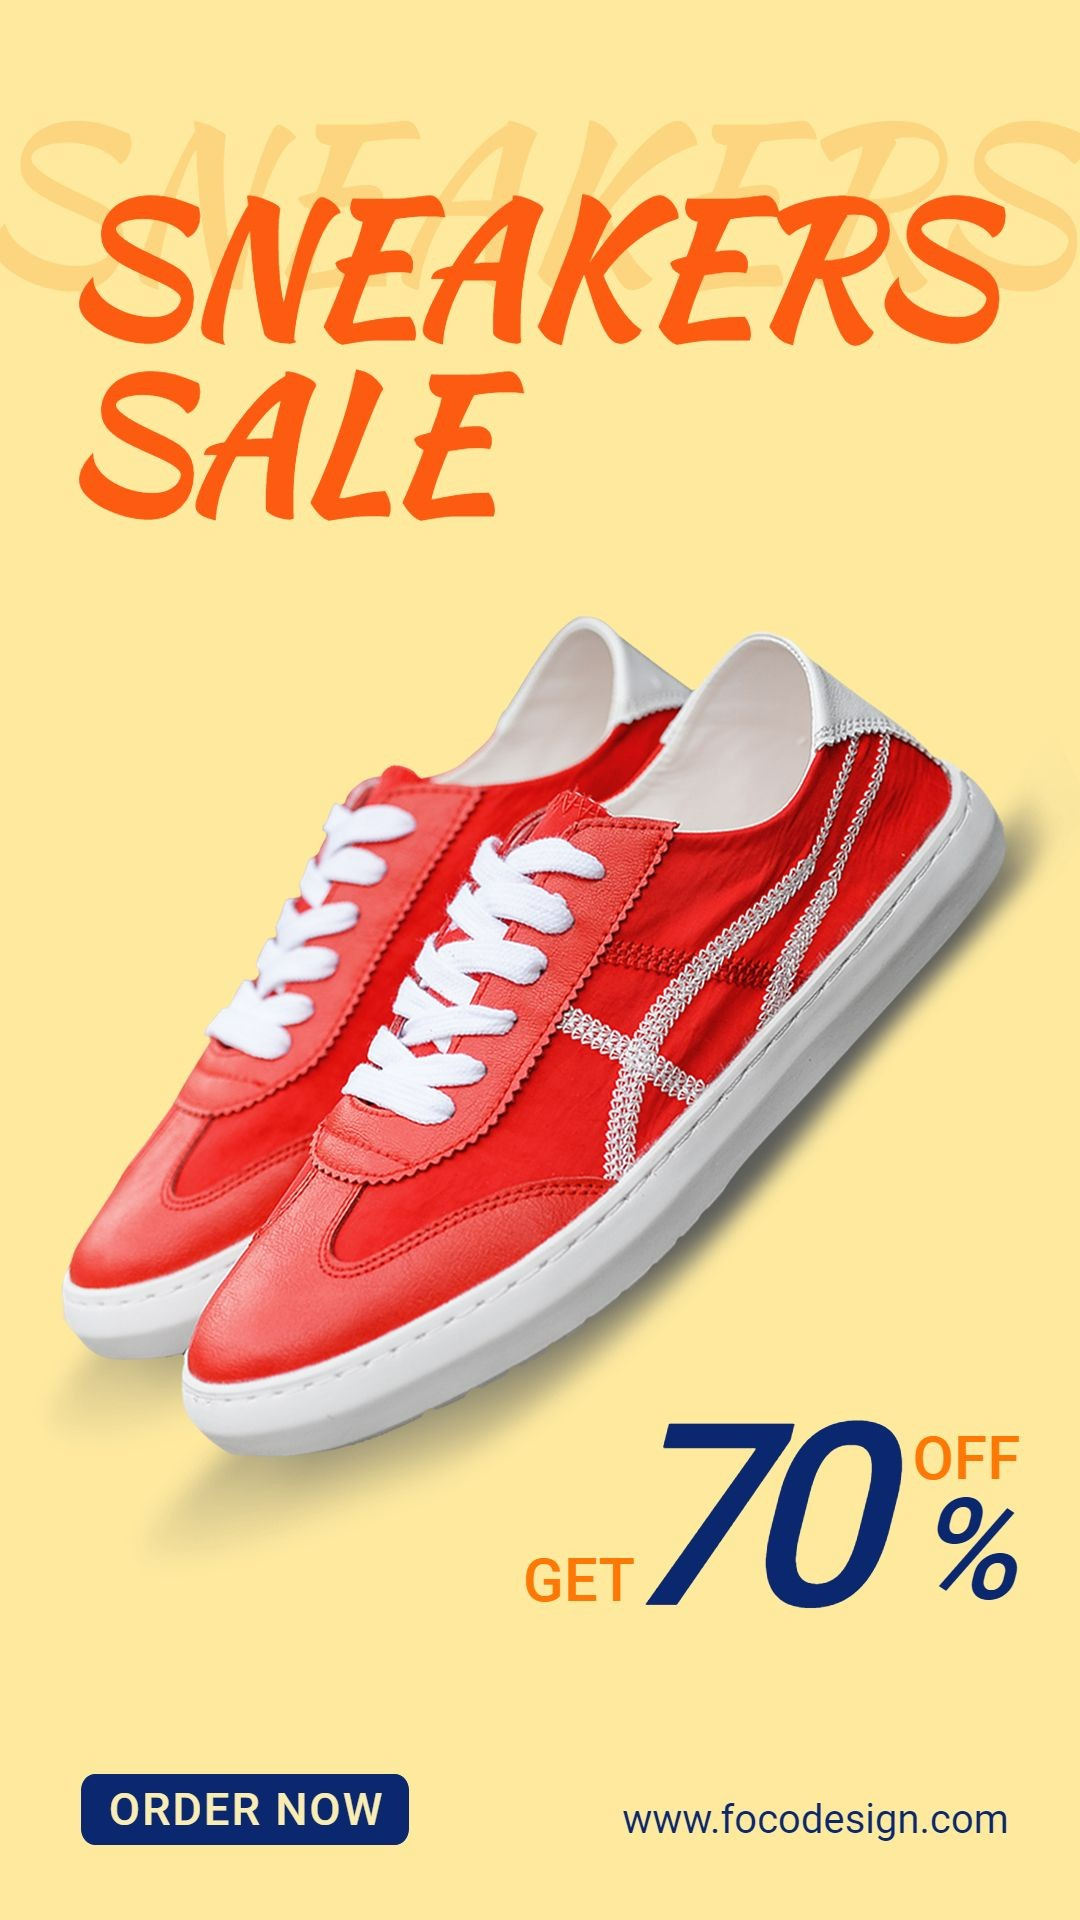 Sneakers Fashion Sale Promo Ecommerce Story预览效果